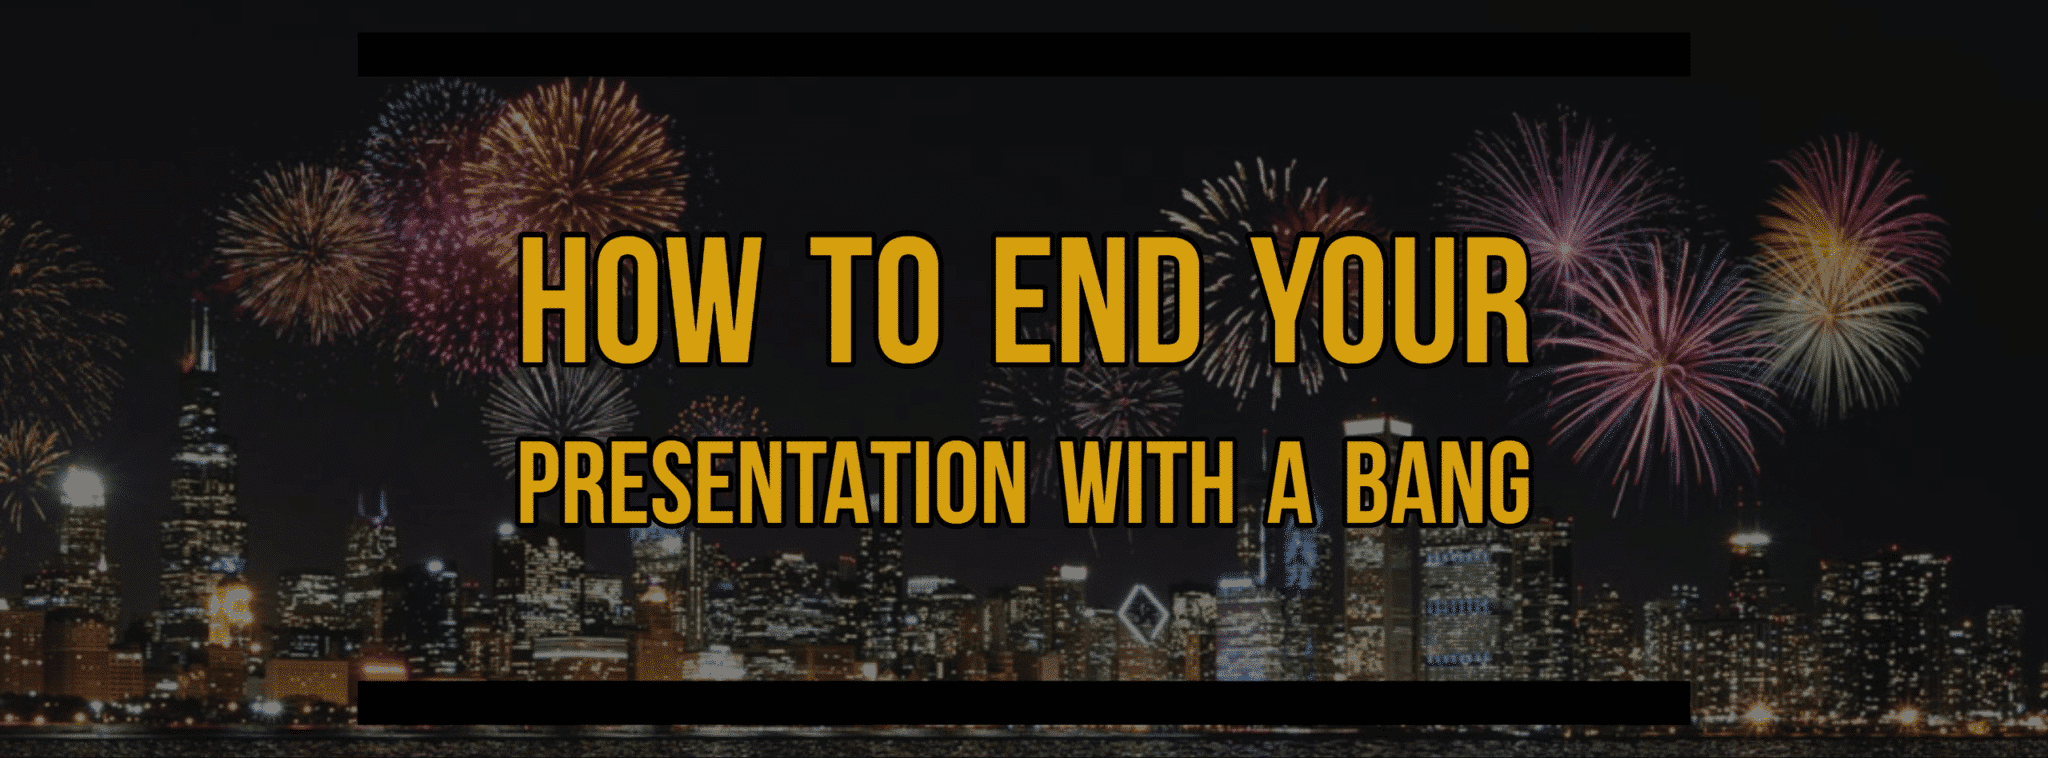 ways to end your presentation